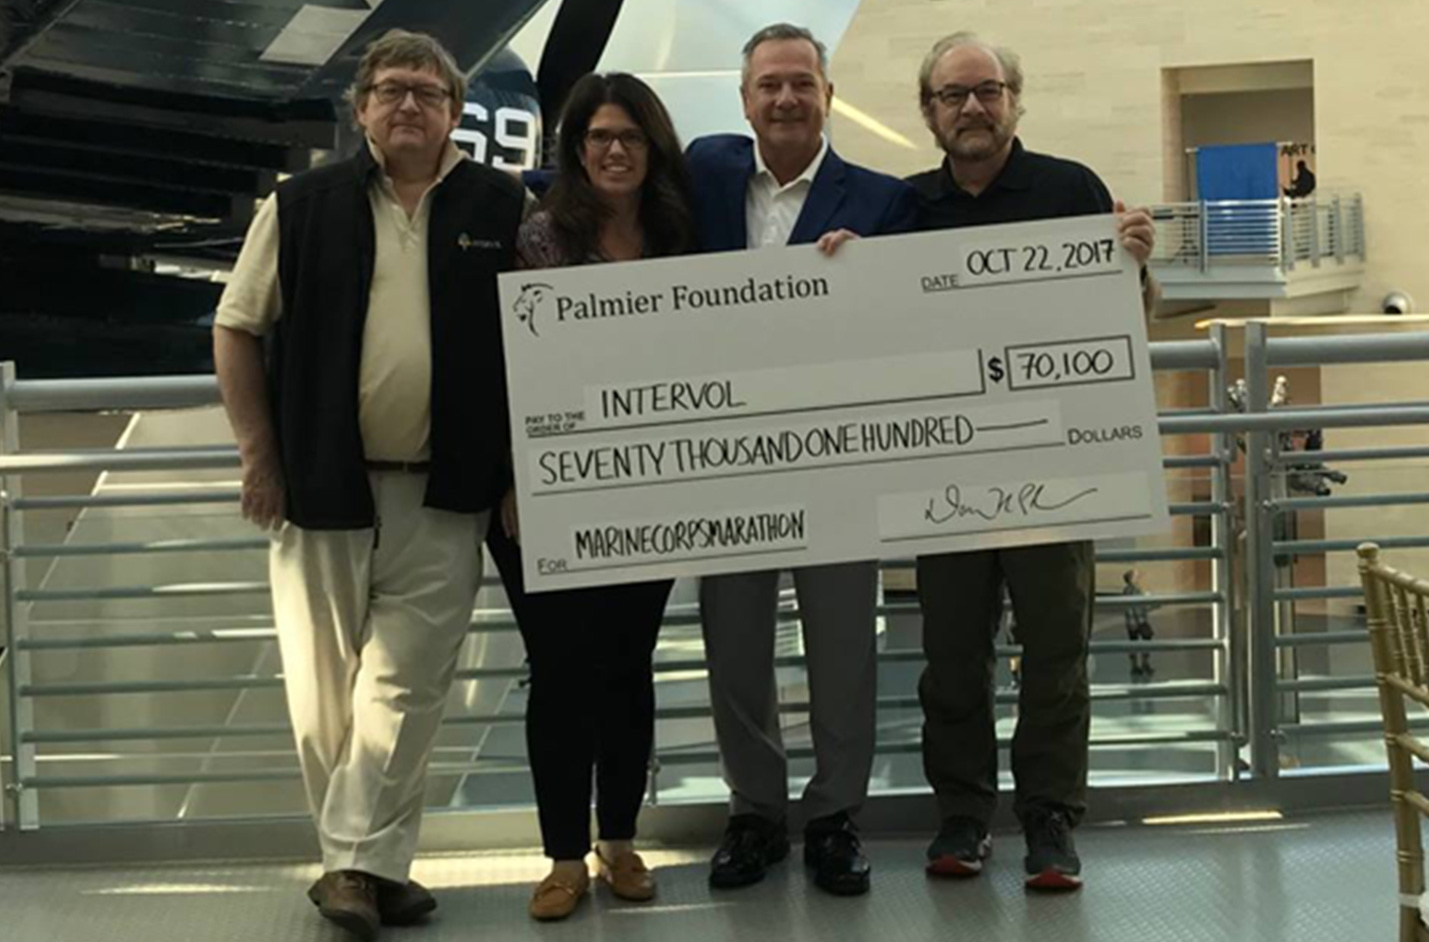 The Palmier Foundation Goes Above and Beyond for Intervol